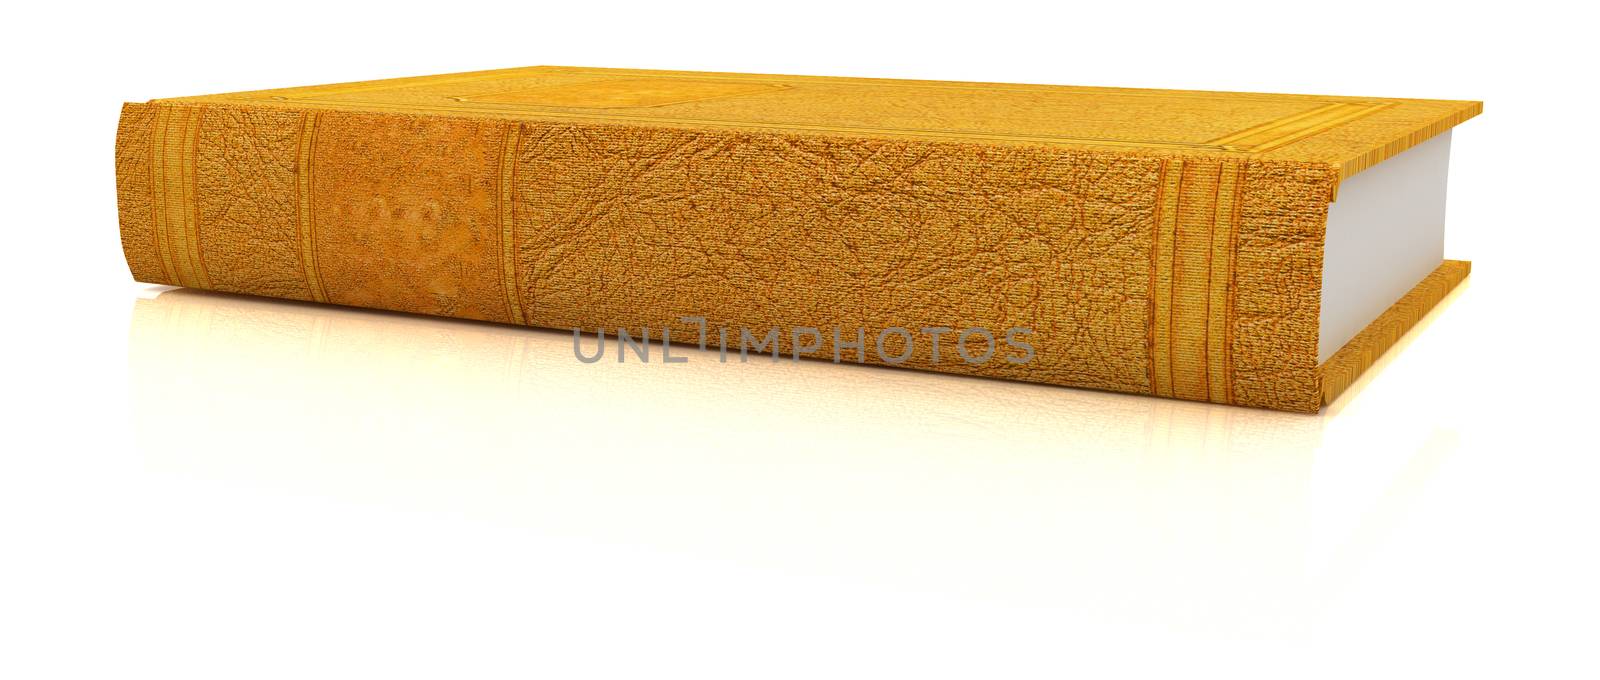 The leather book  by Guru3D